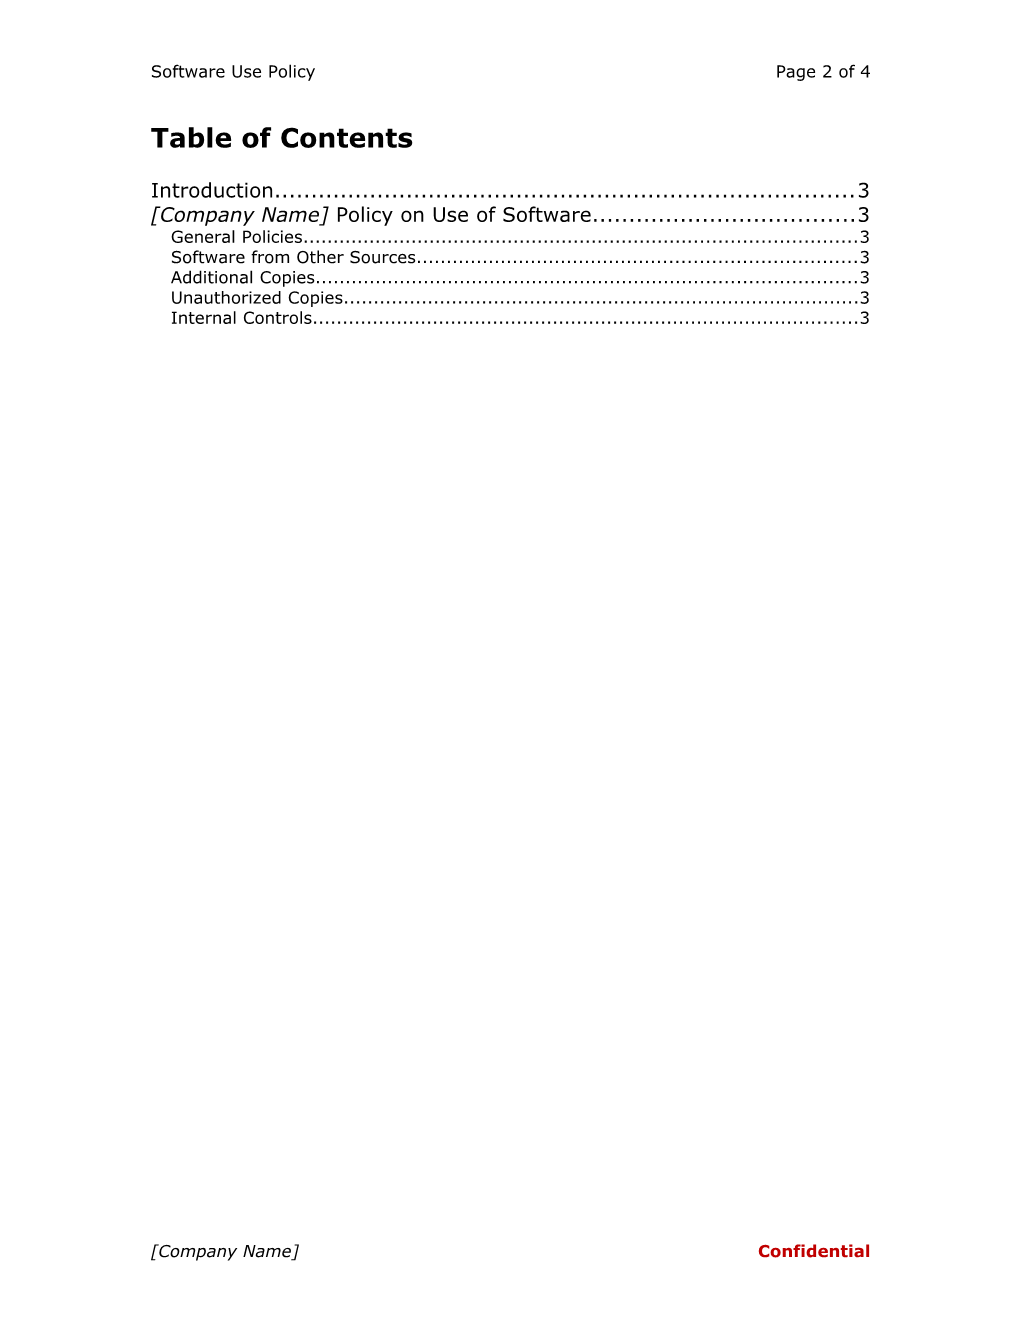 Software Use Policy Page 3 of 3